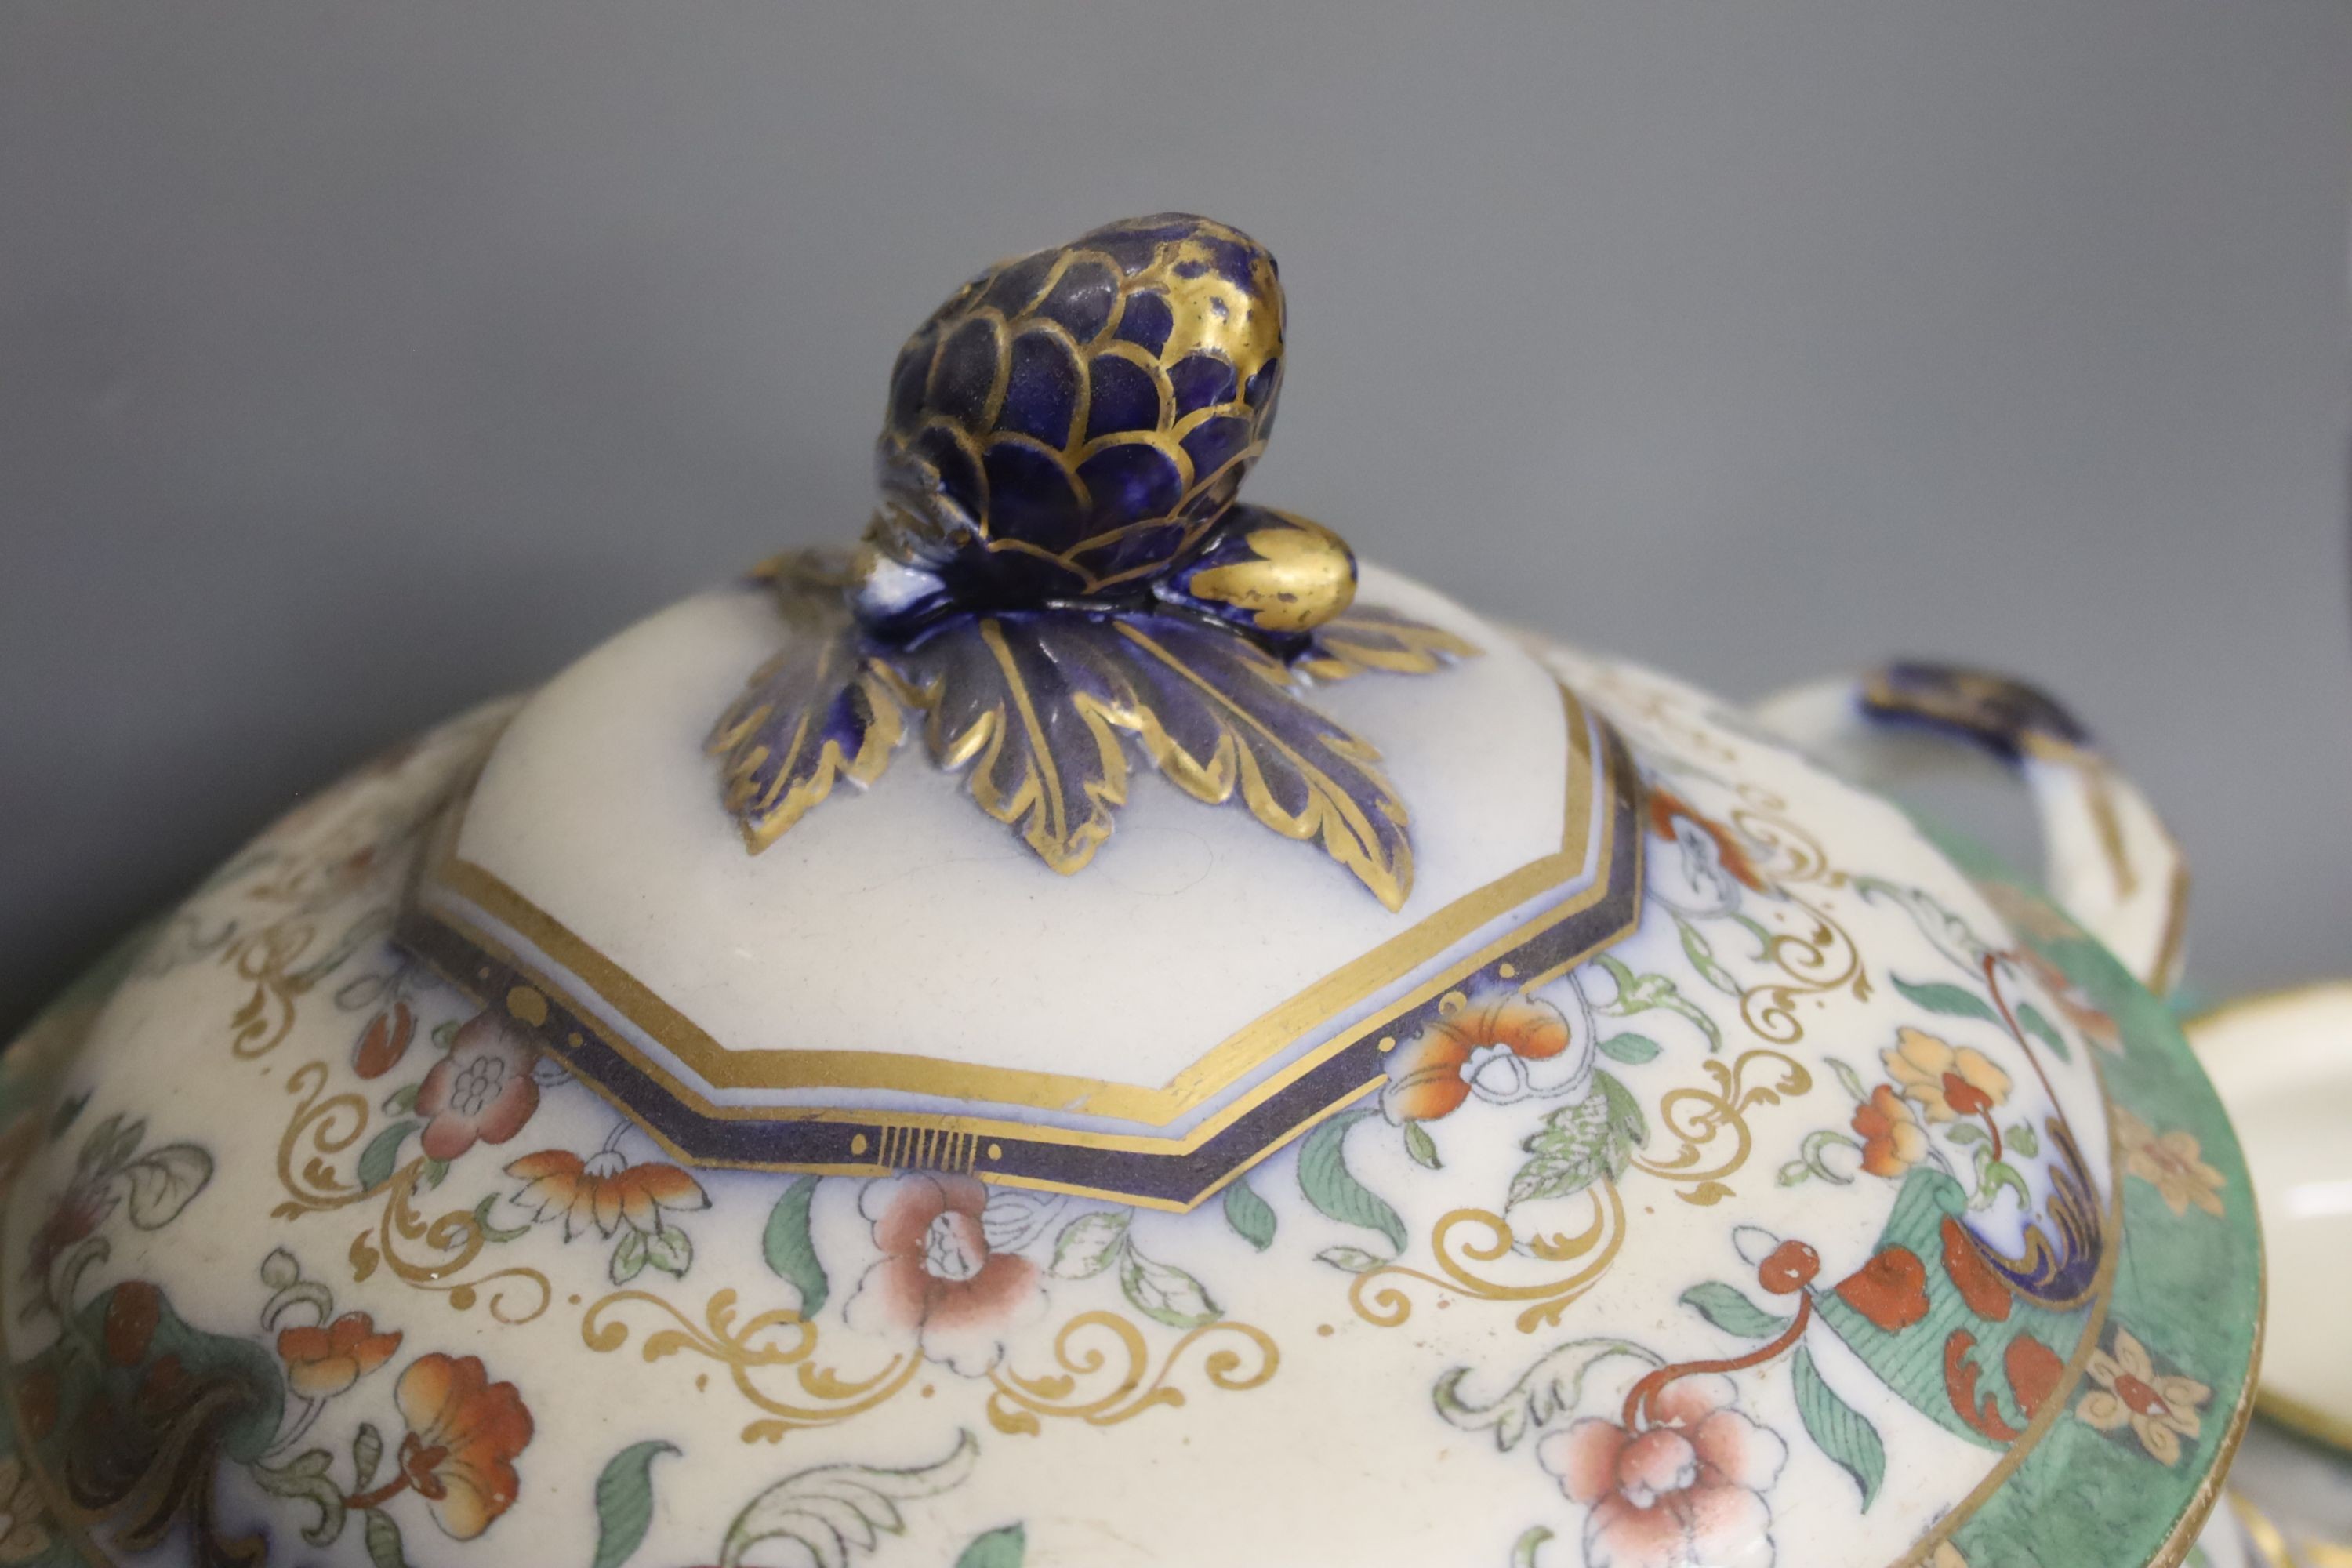 A mid 19th century Staffordshire pottery lidded soup tureen and cover (base cracked), a large meat dish and a sauce tureen (lacking lid) (3)